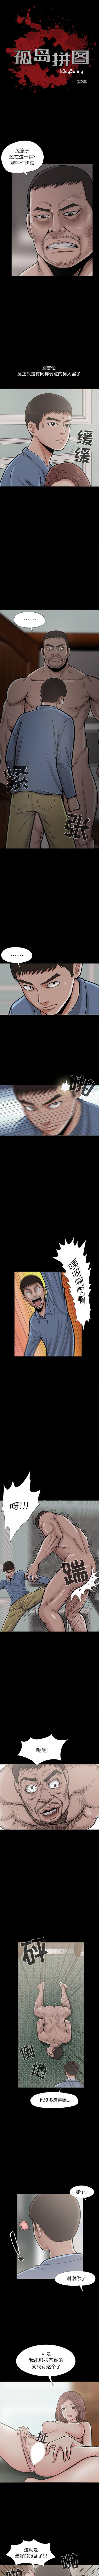 Lesbos 孤島拼圖 1-28 Fisting - Page 10